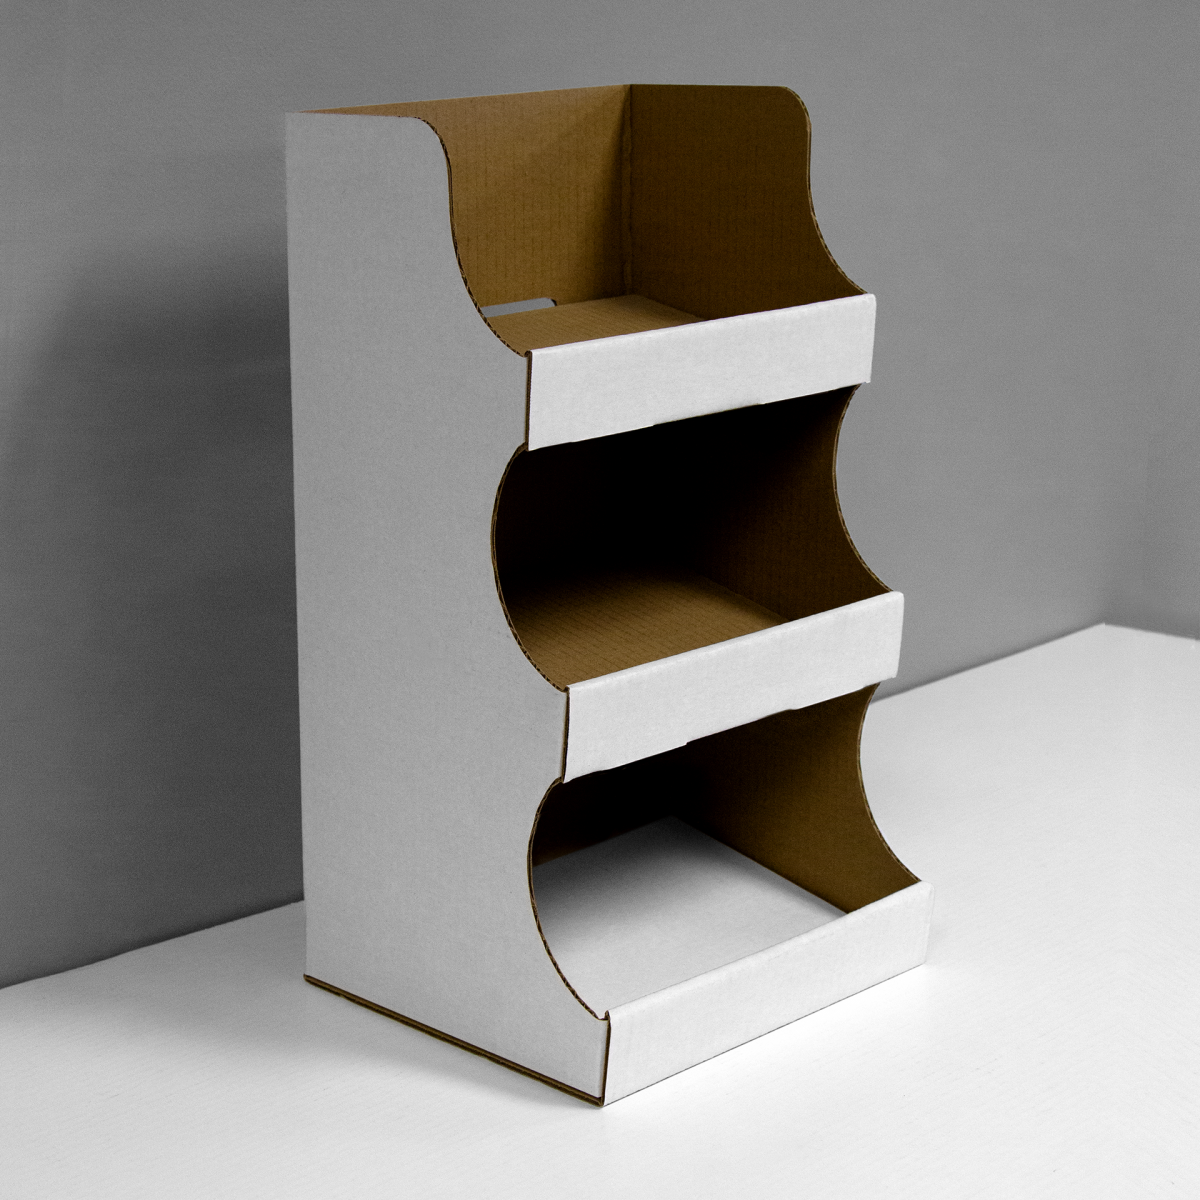 Cardboard counter display with 3 shelves - white